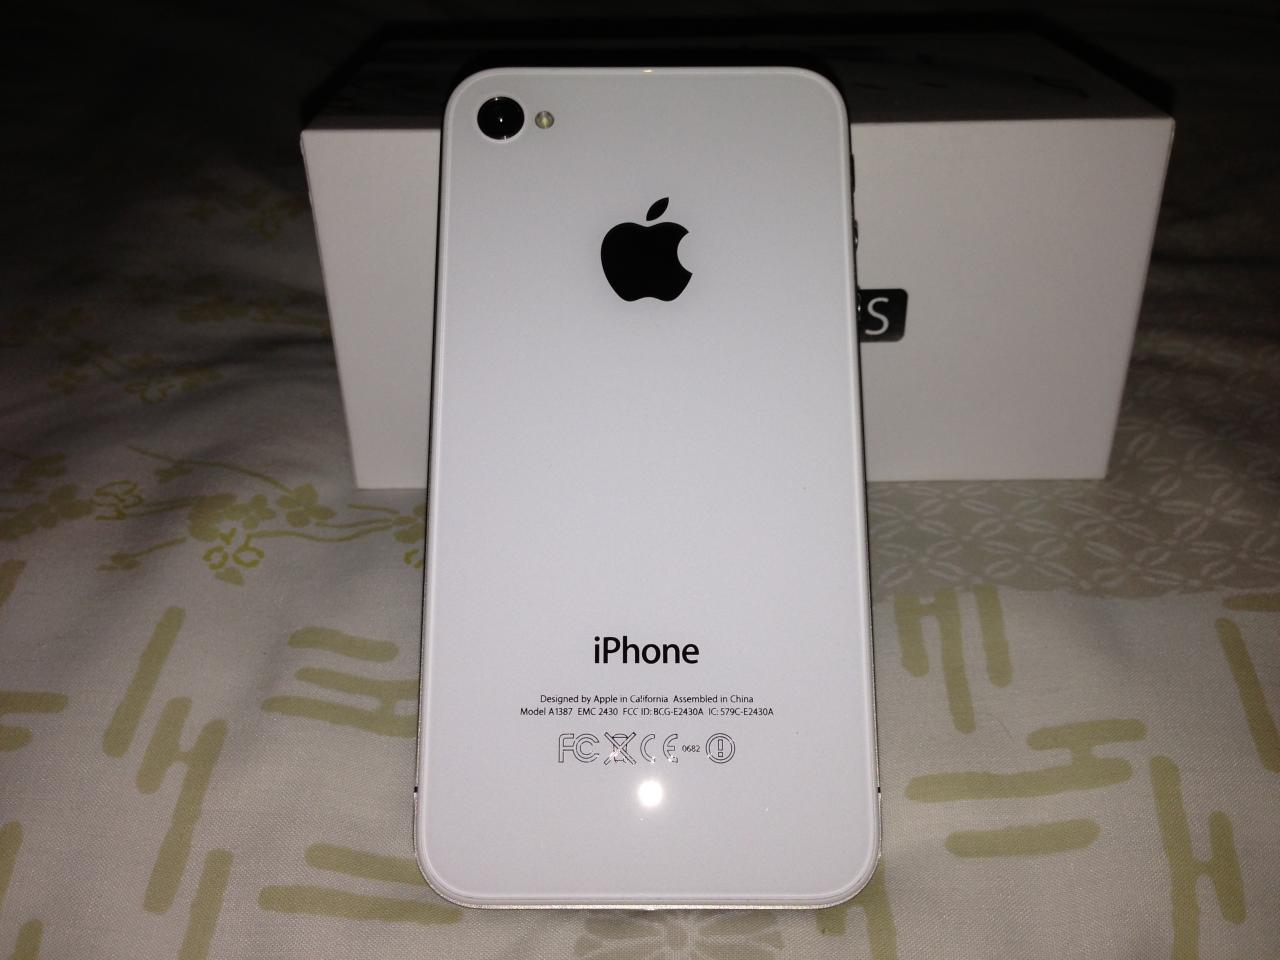 Iphone Accessories Iphone 4s White 16gb Box Only With Accessories New